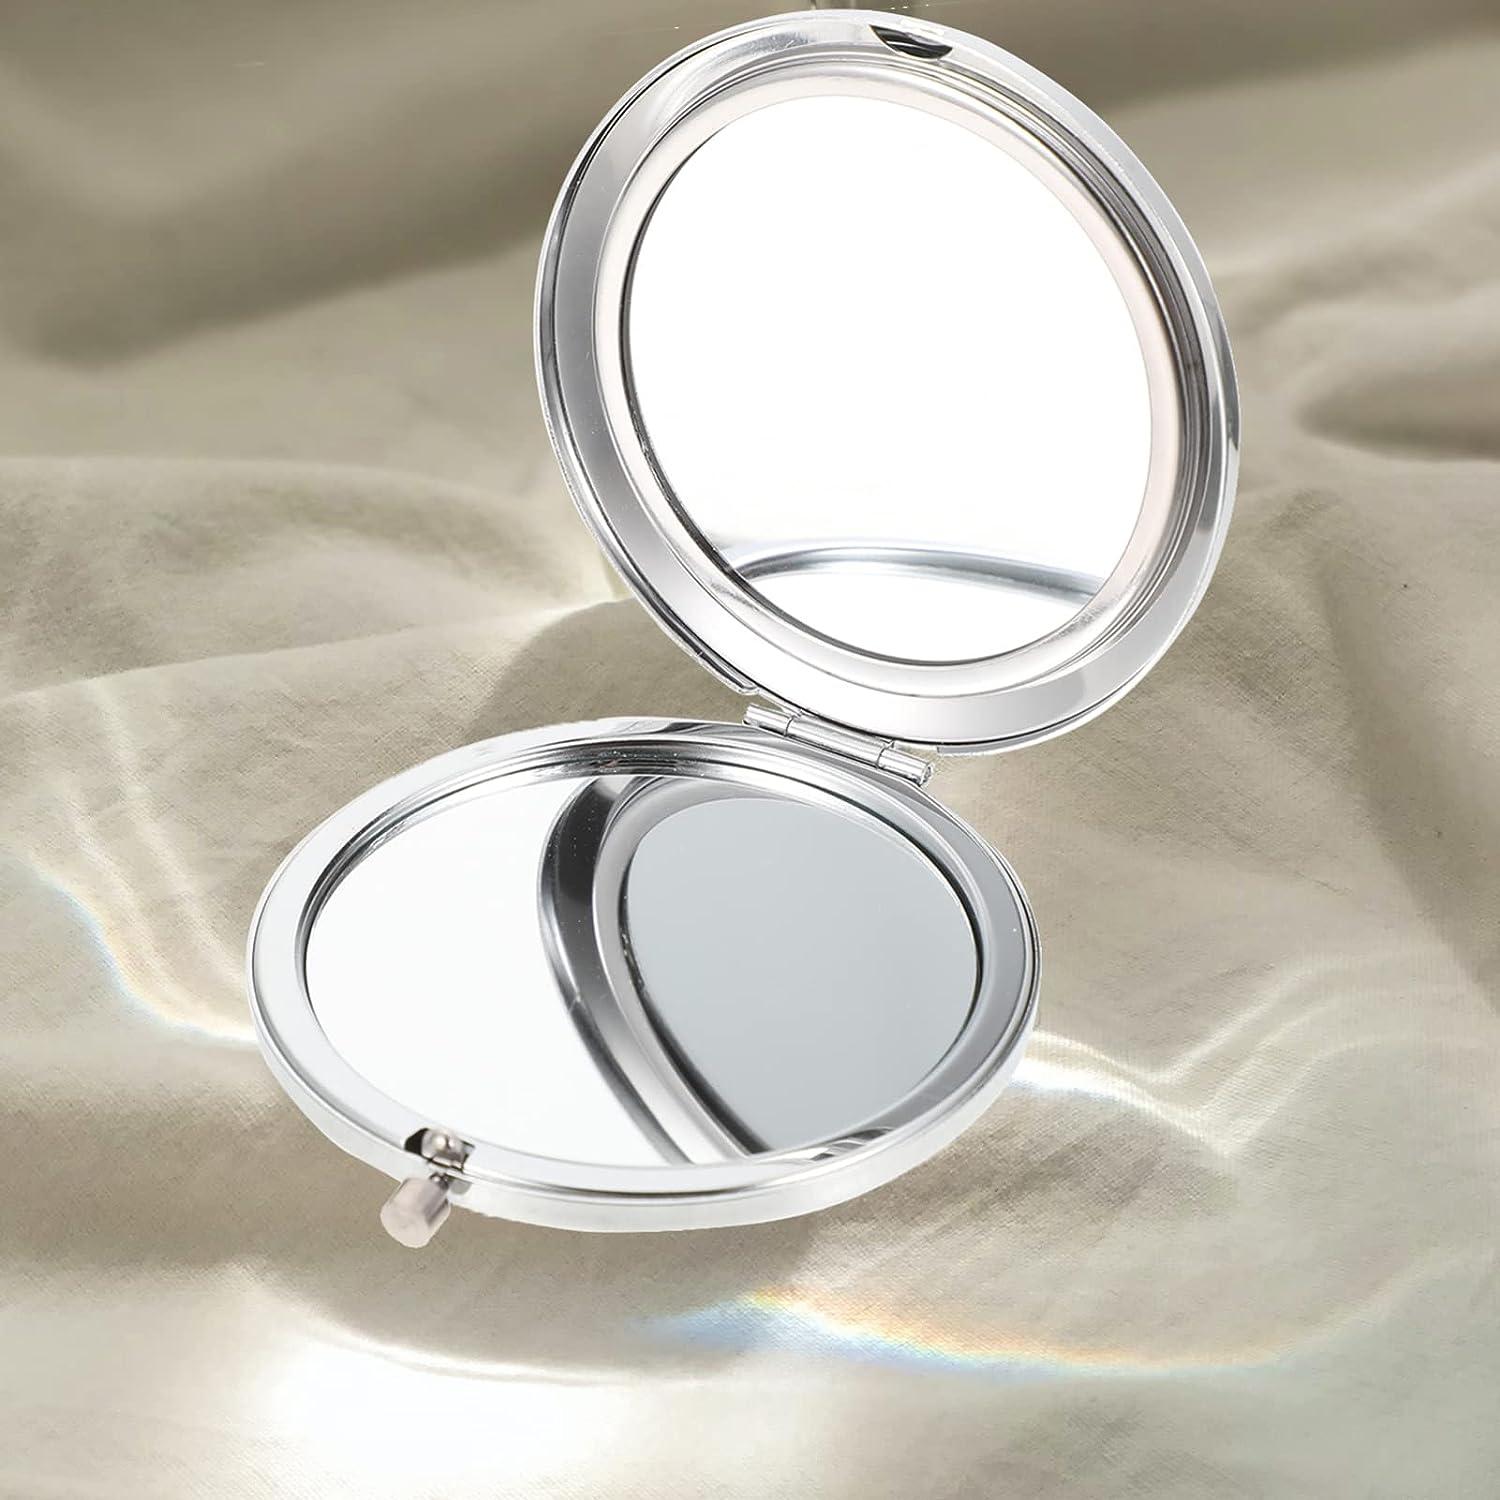 Personalized Purse Mirrors | Engraved Compact Mirrors